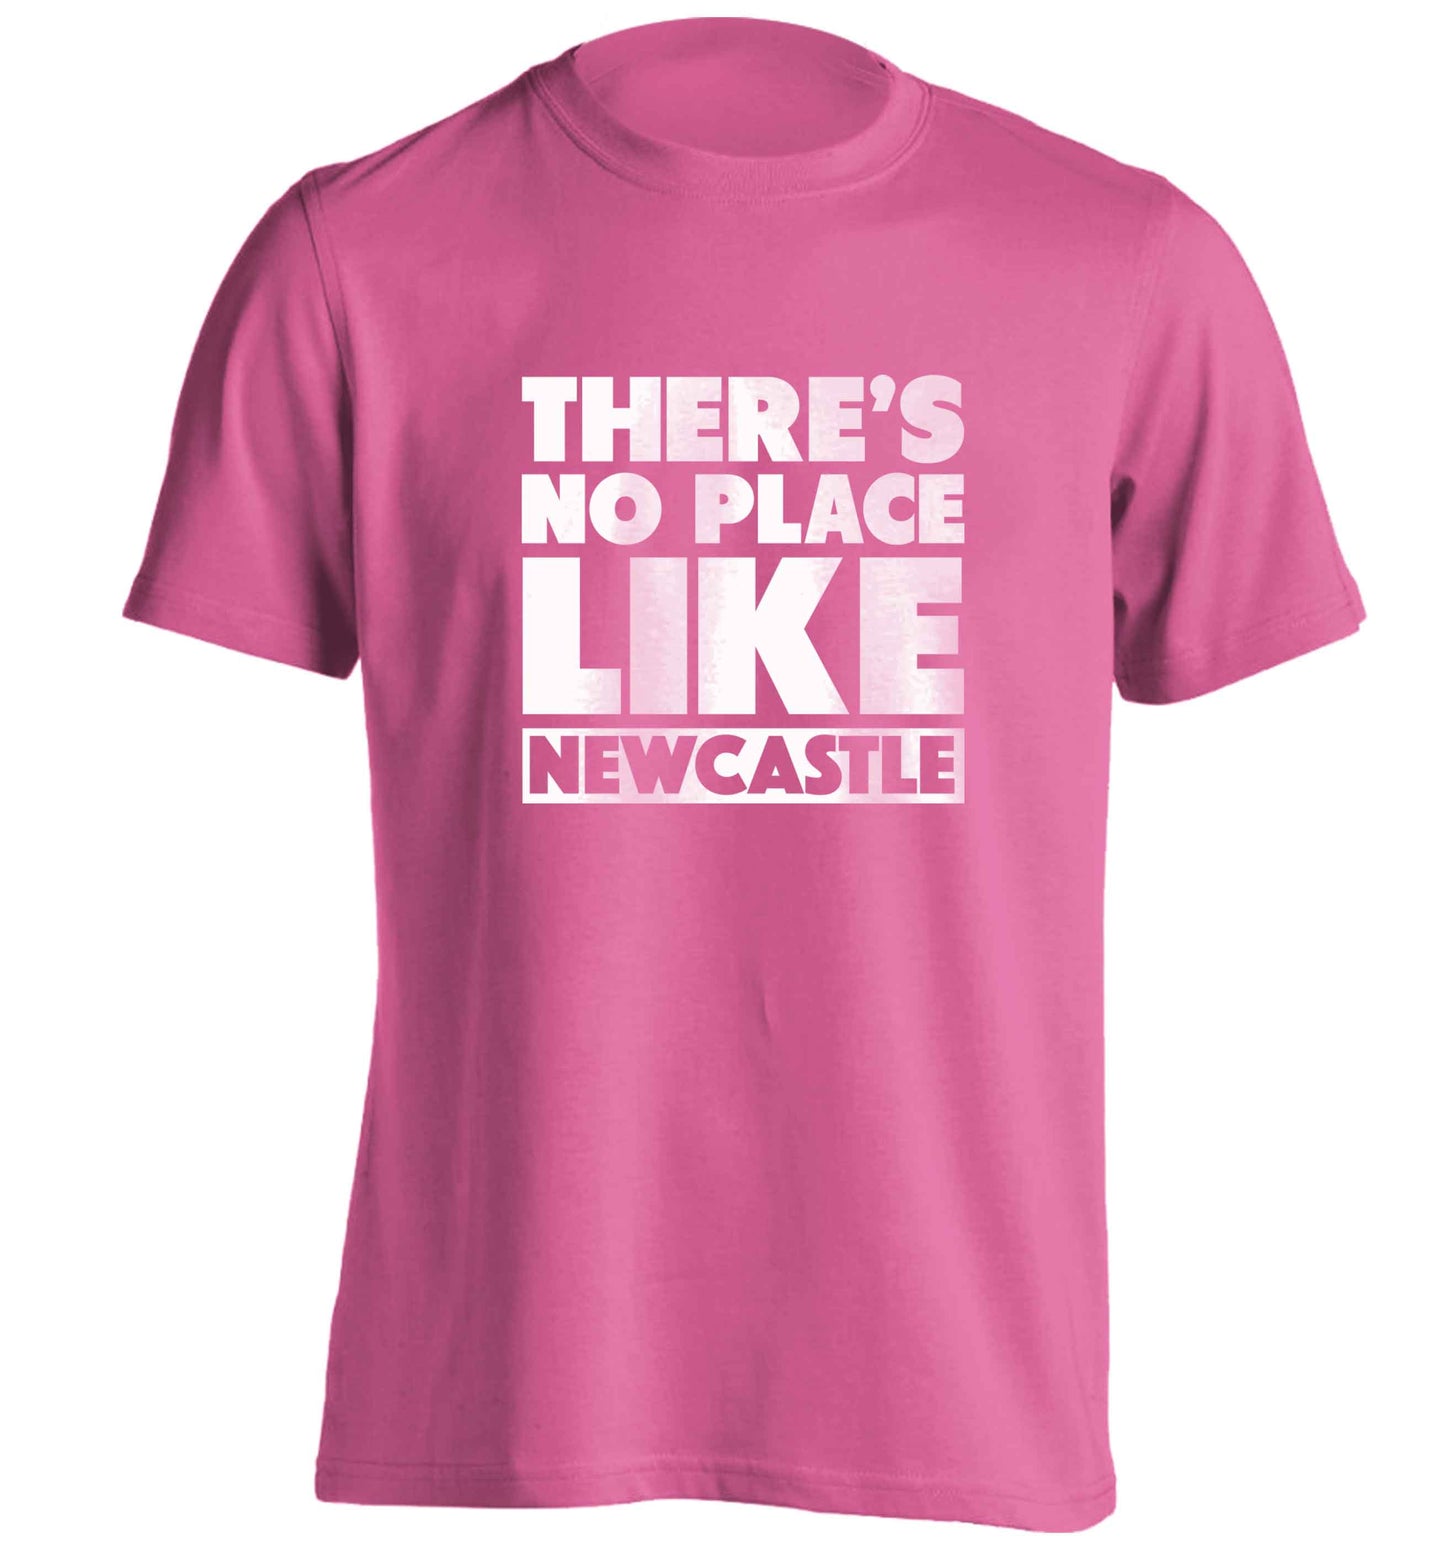 There's no place like Newcastle adults unisex pink Tshirt 2XL